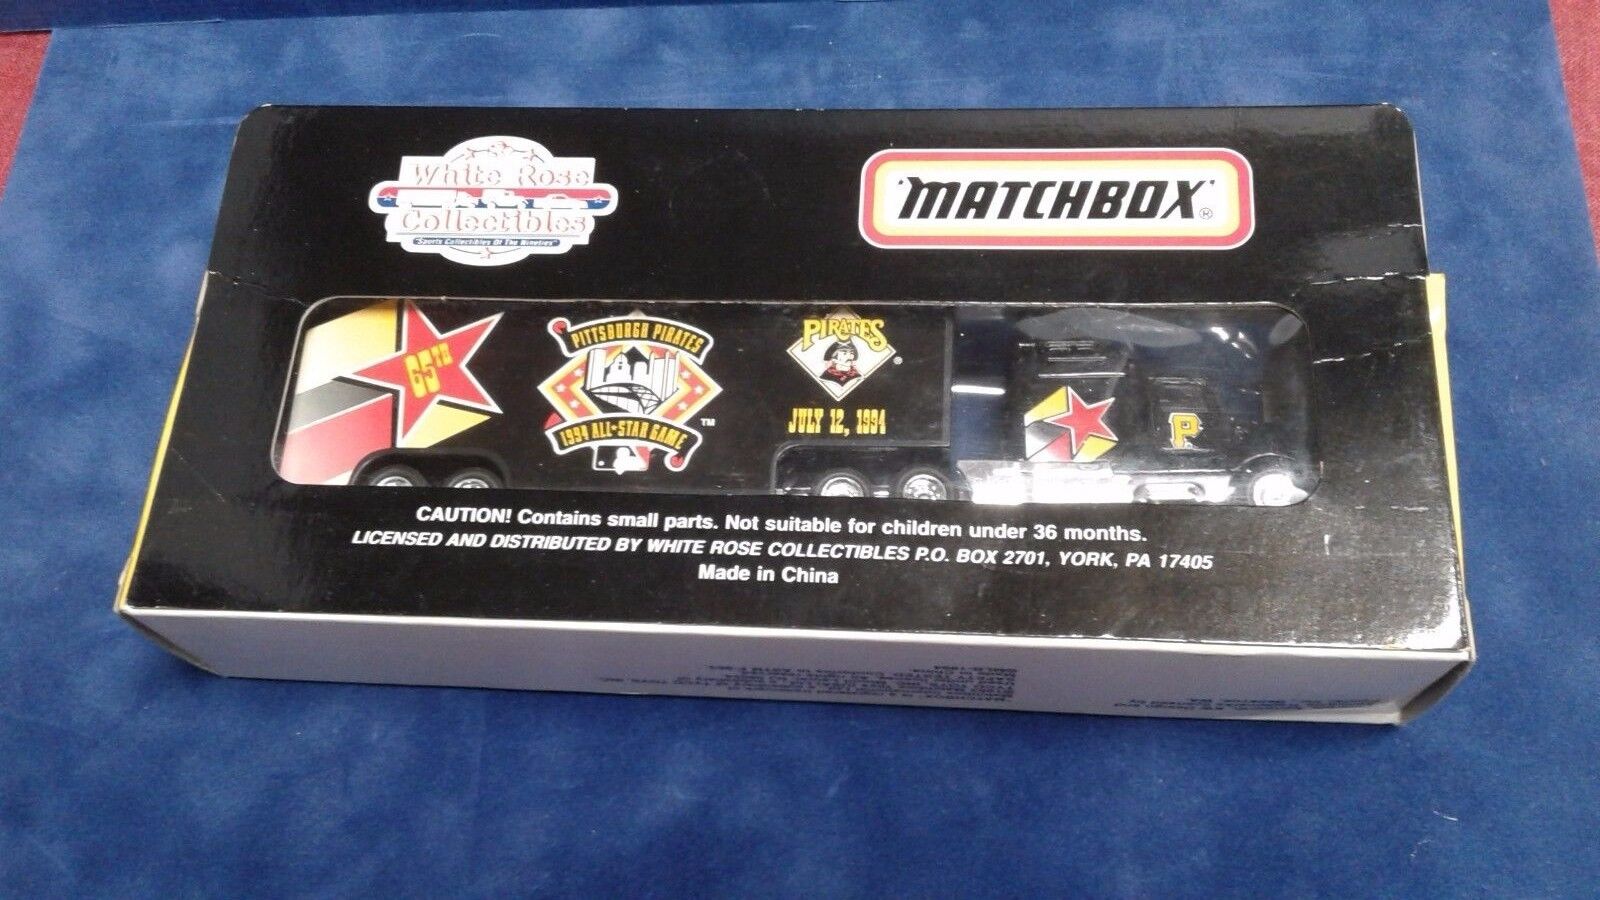 Matchbox- 1994 65th All Star Game Pittsburgh Pirates -Semi Tractor Trailer Truck